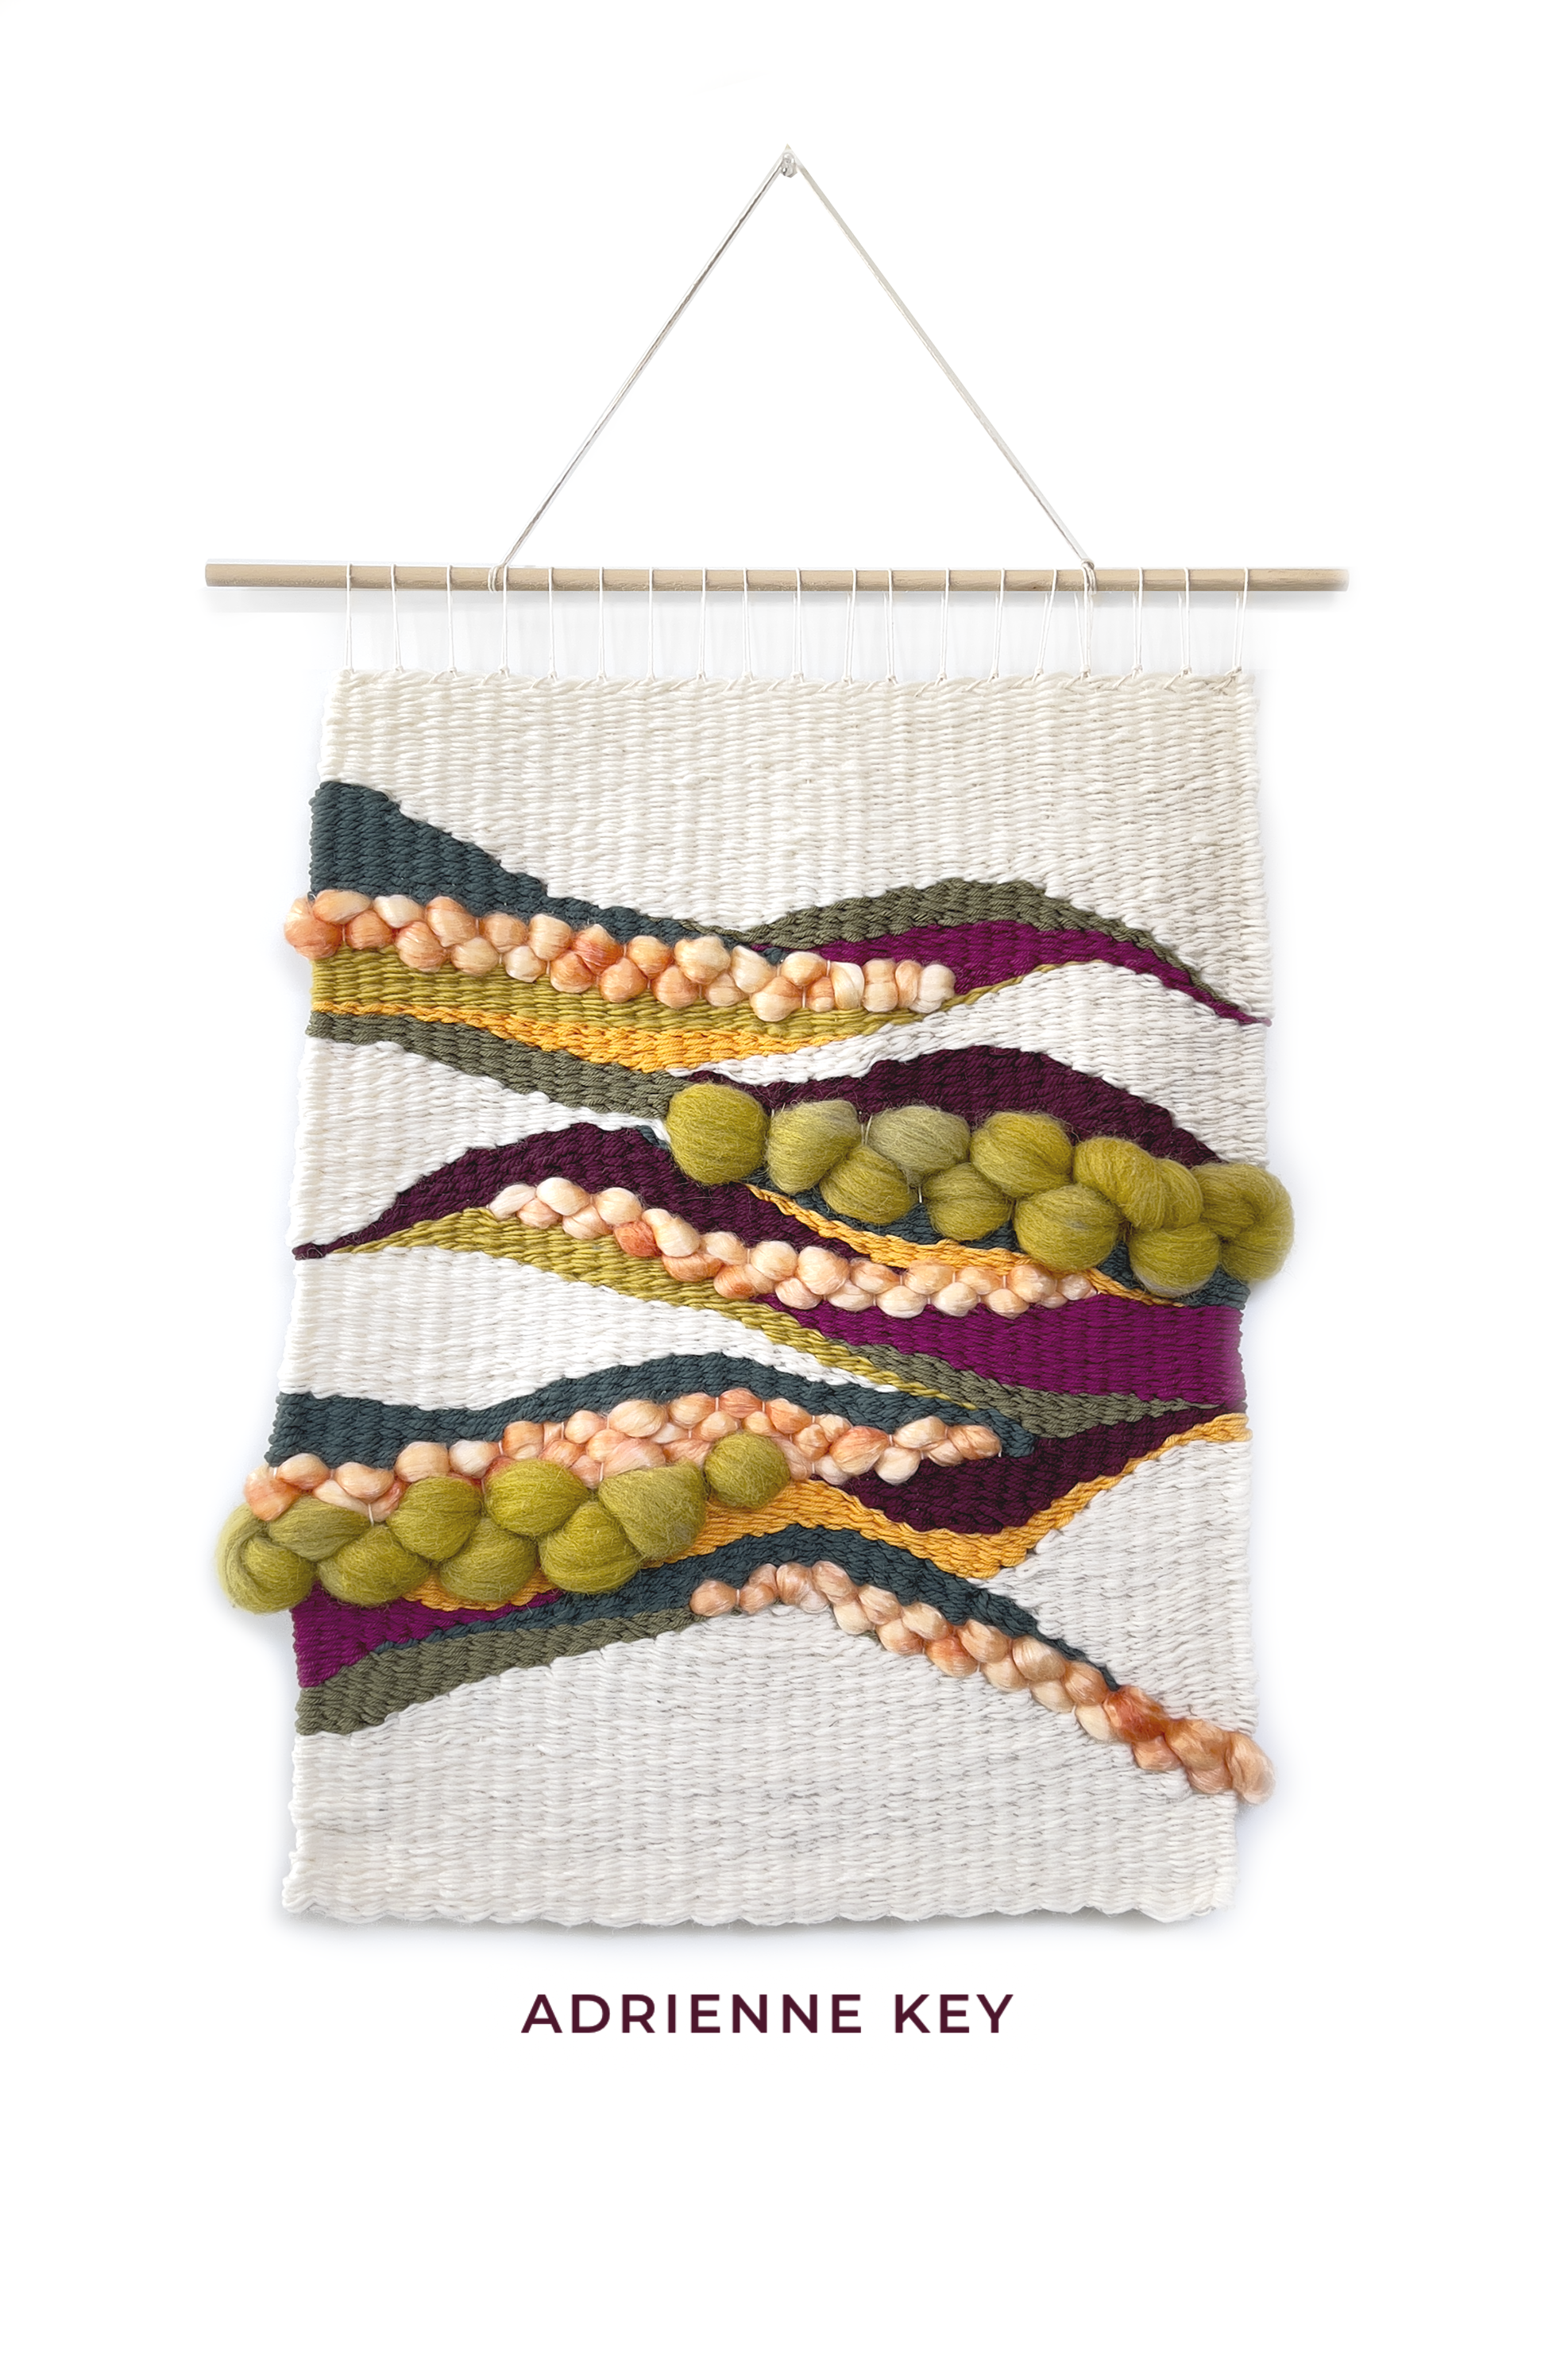 Original wall tapestry on a wood dowel that is 40x26 inches depicting a colorful abstract organic weaving in wool